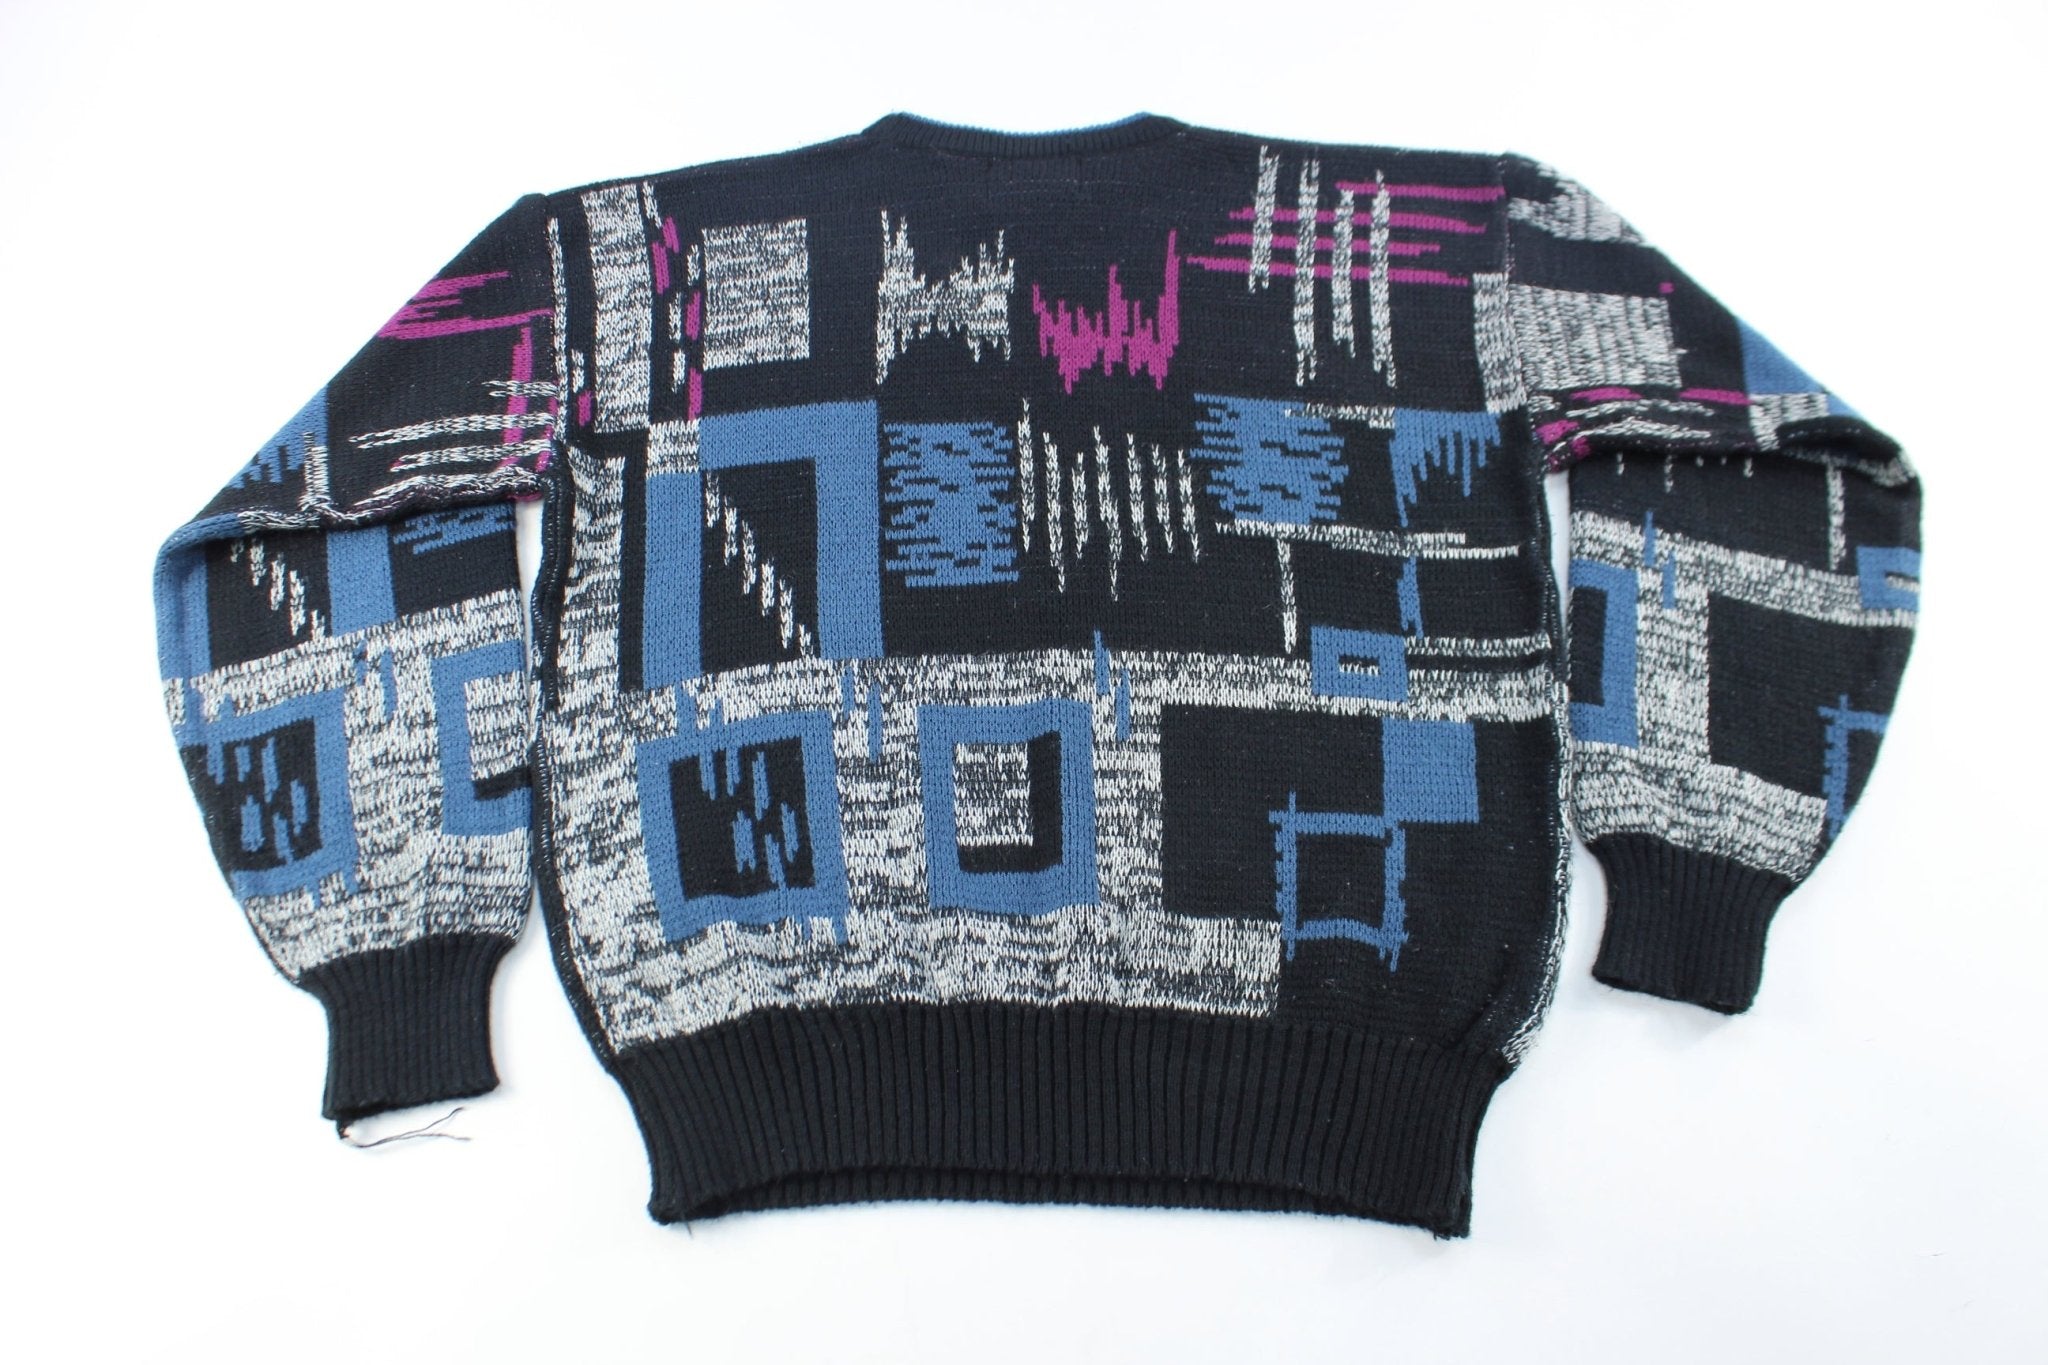 Wear The Right Thing Patterned Sweater - ThriftedThreads.com